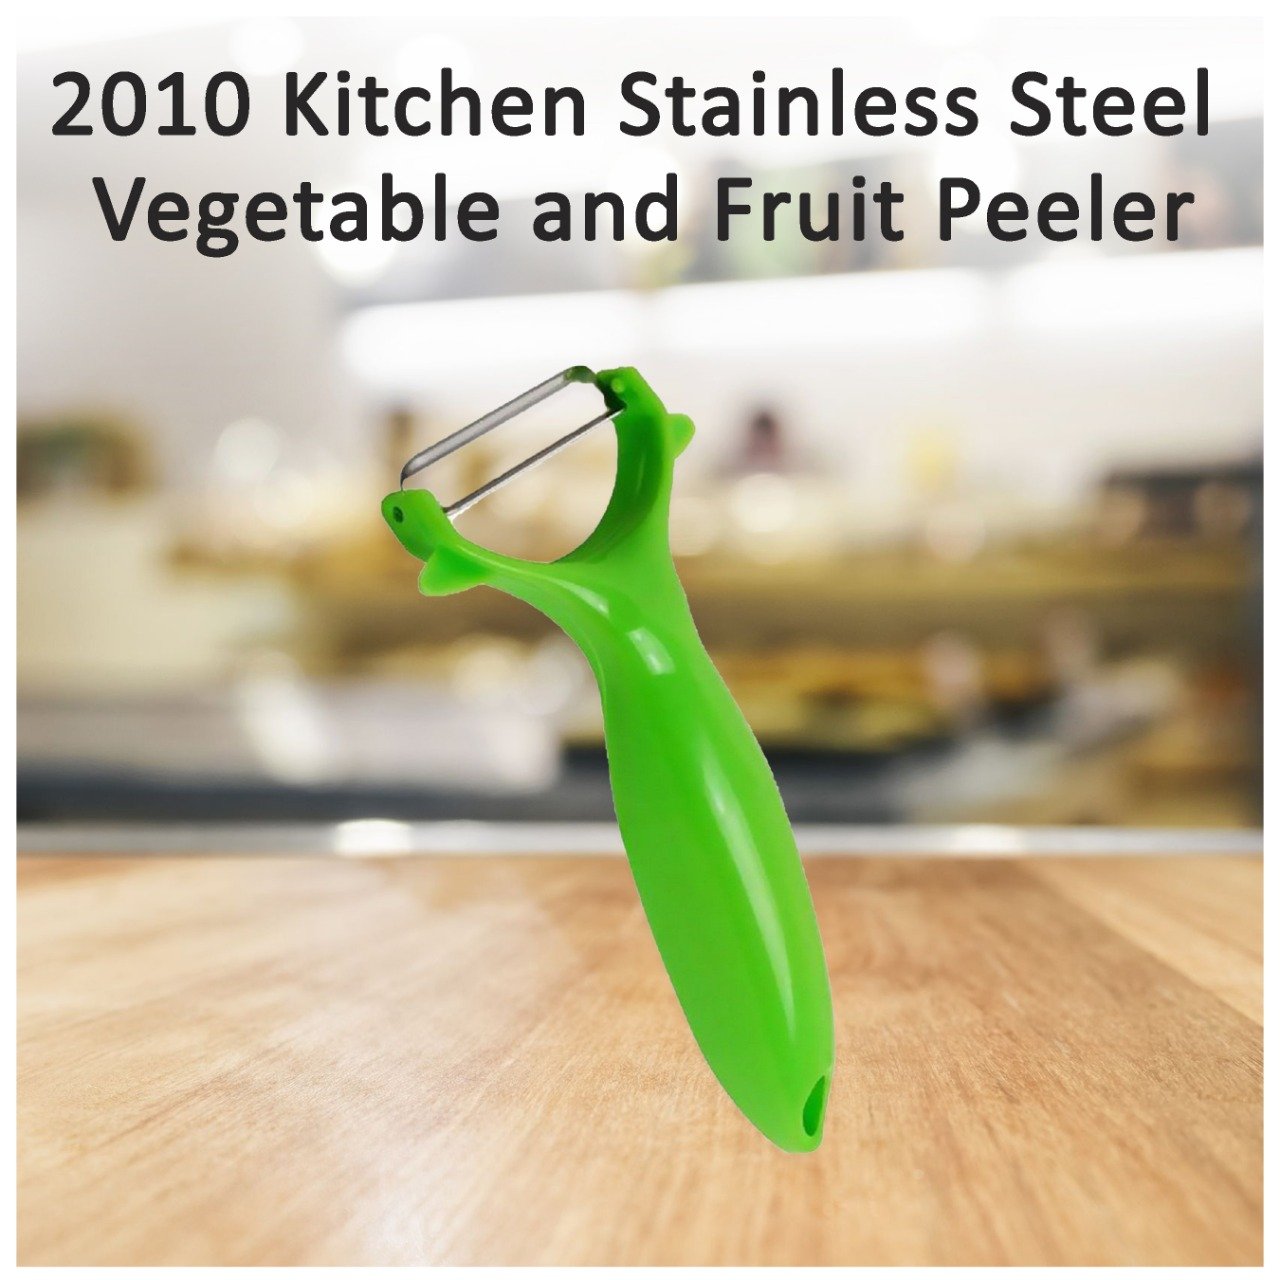 2010 Kitchen Stainless Steel Vegetable and Fruit Peeler - SkyShopy